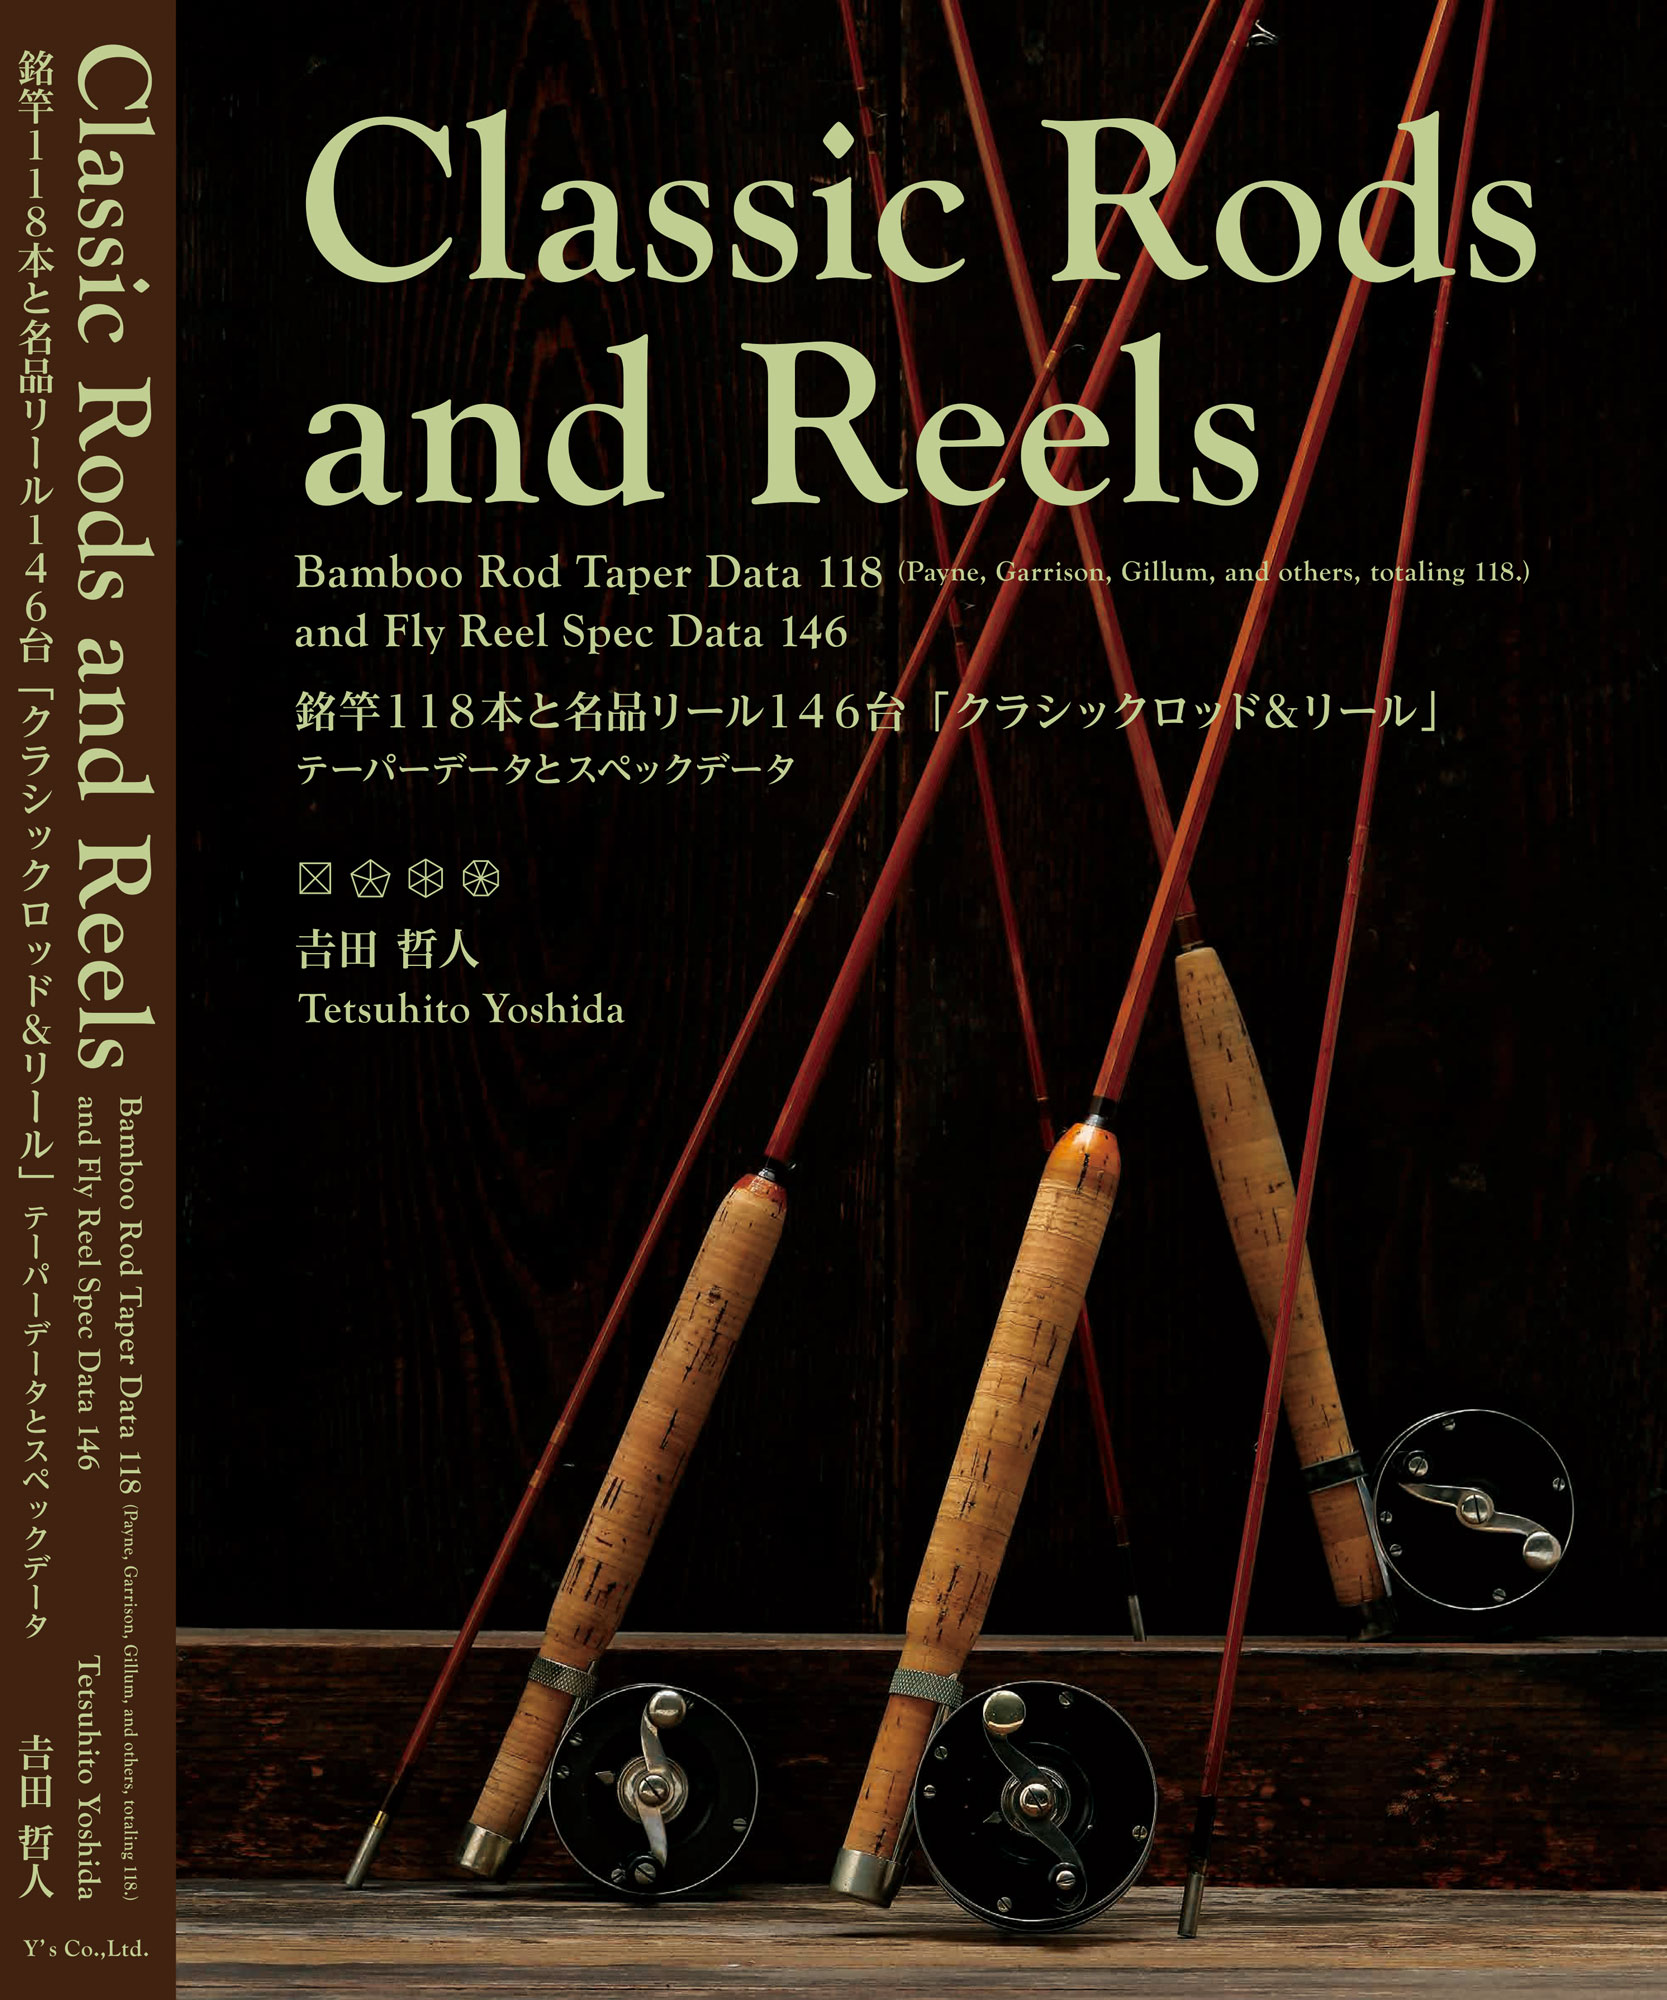 Classic Rods and Reels   クラシックロッド＆リールの商品画像